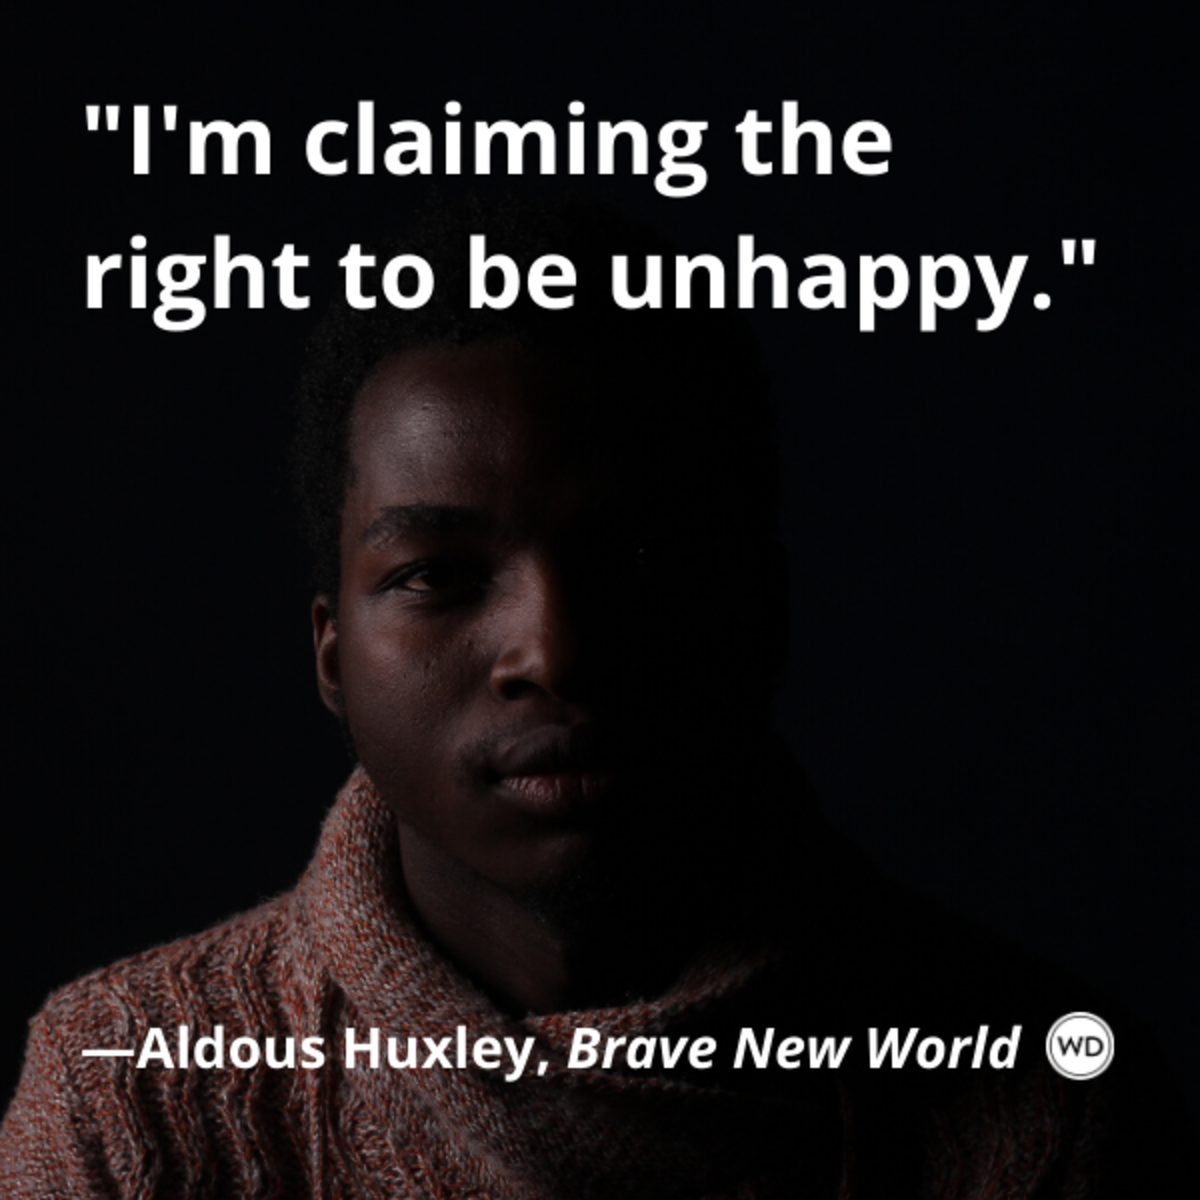 brave new world quotes about religion